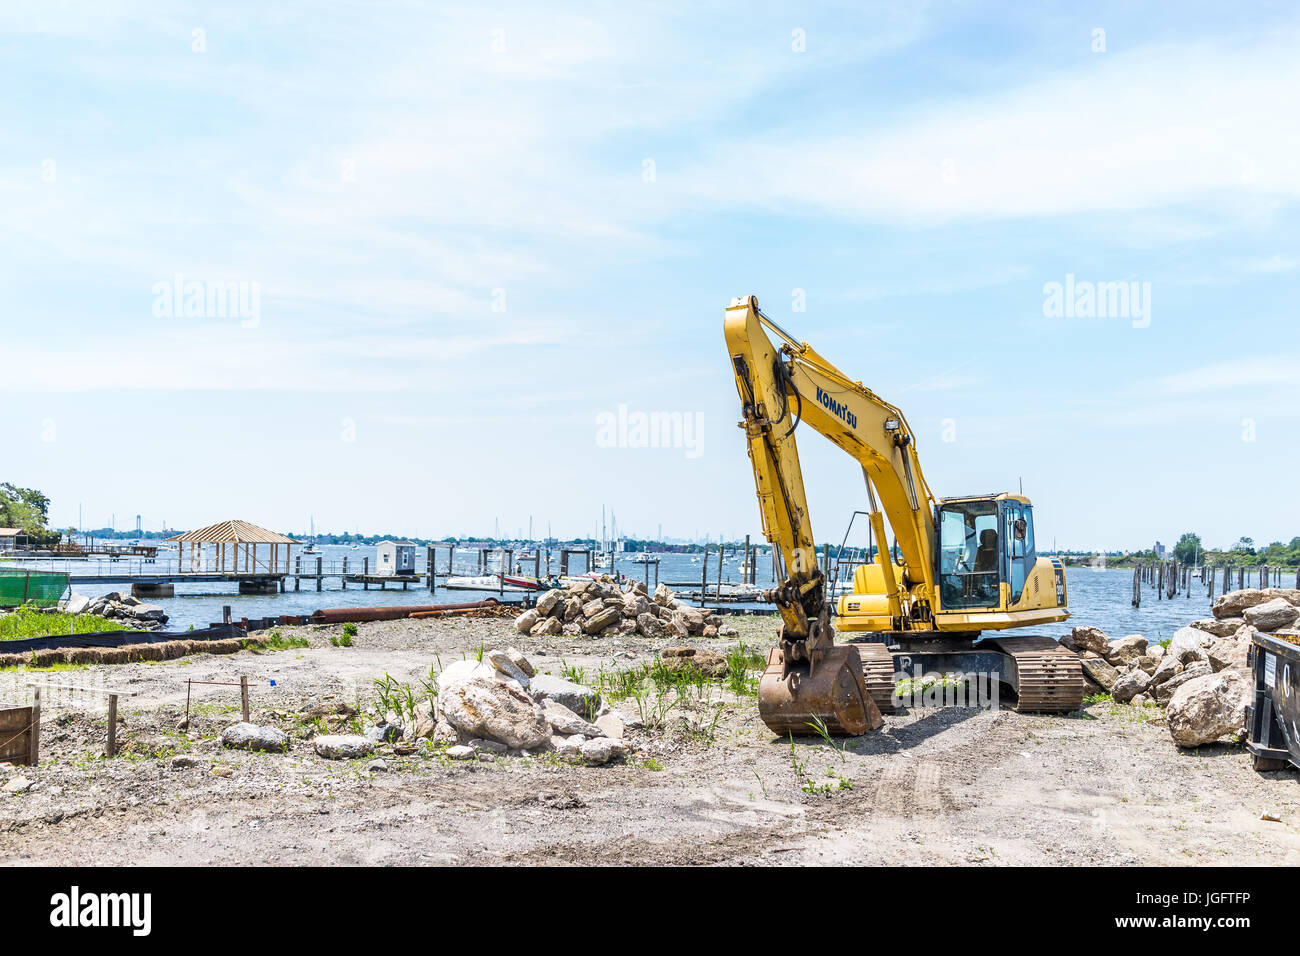 Bronx, USA - June 11, 2017: City Island harbor with boats and construction truck Stock Photo